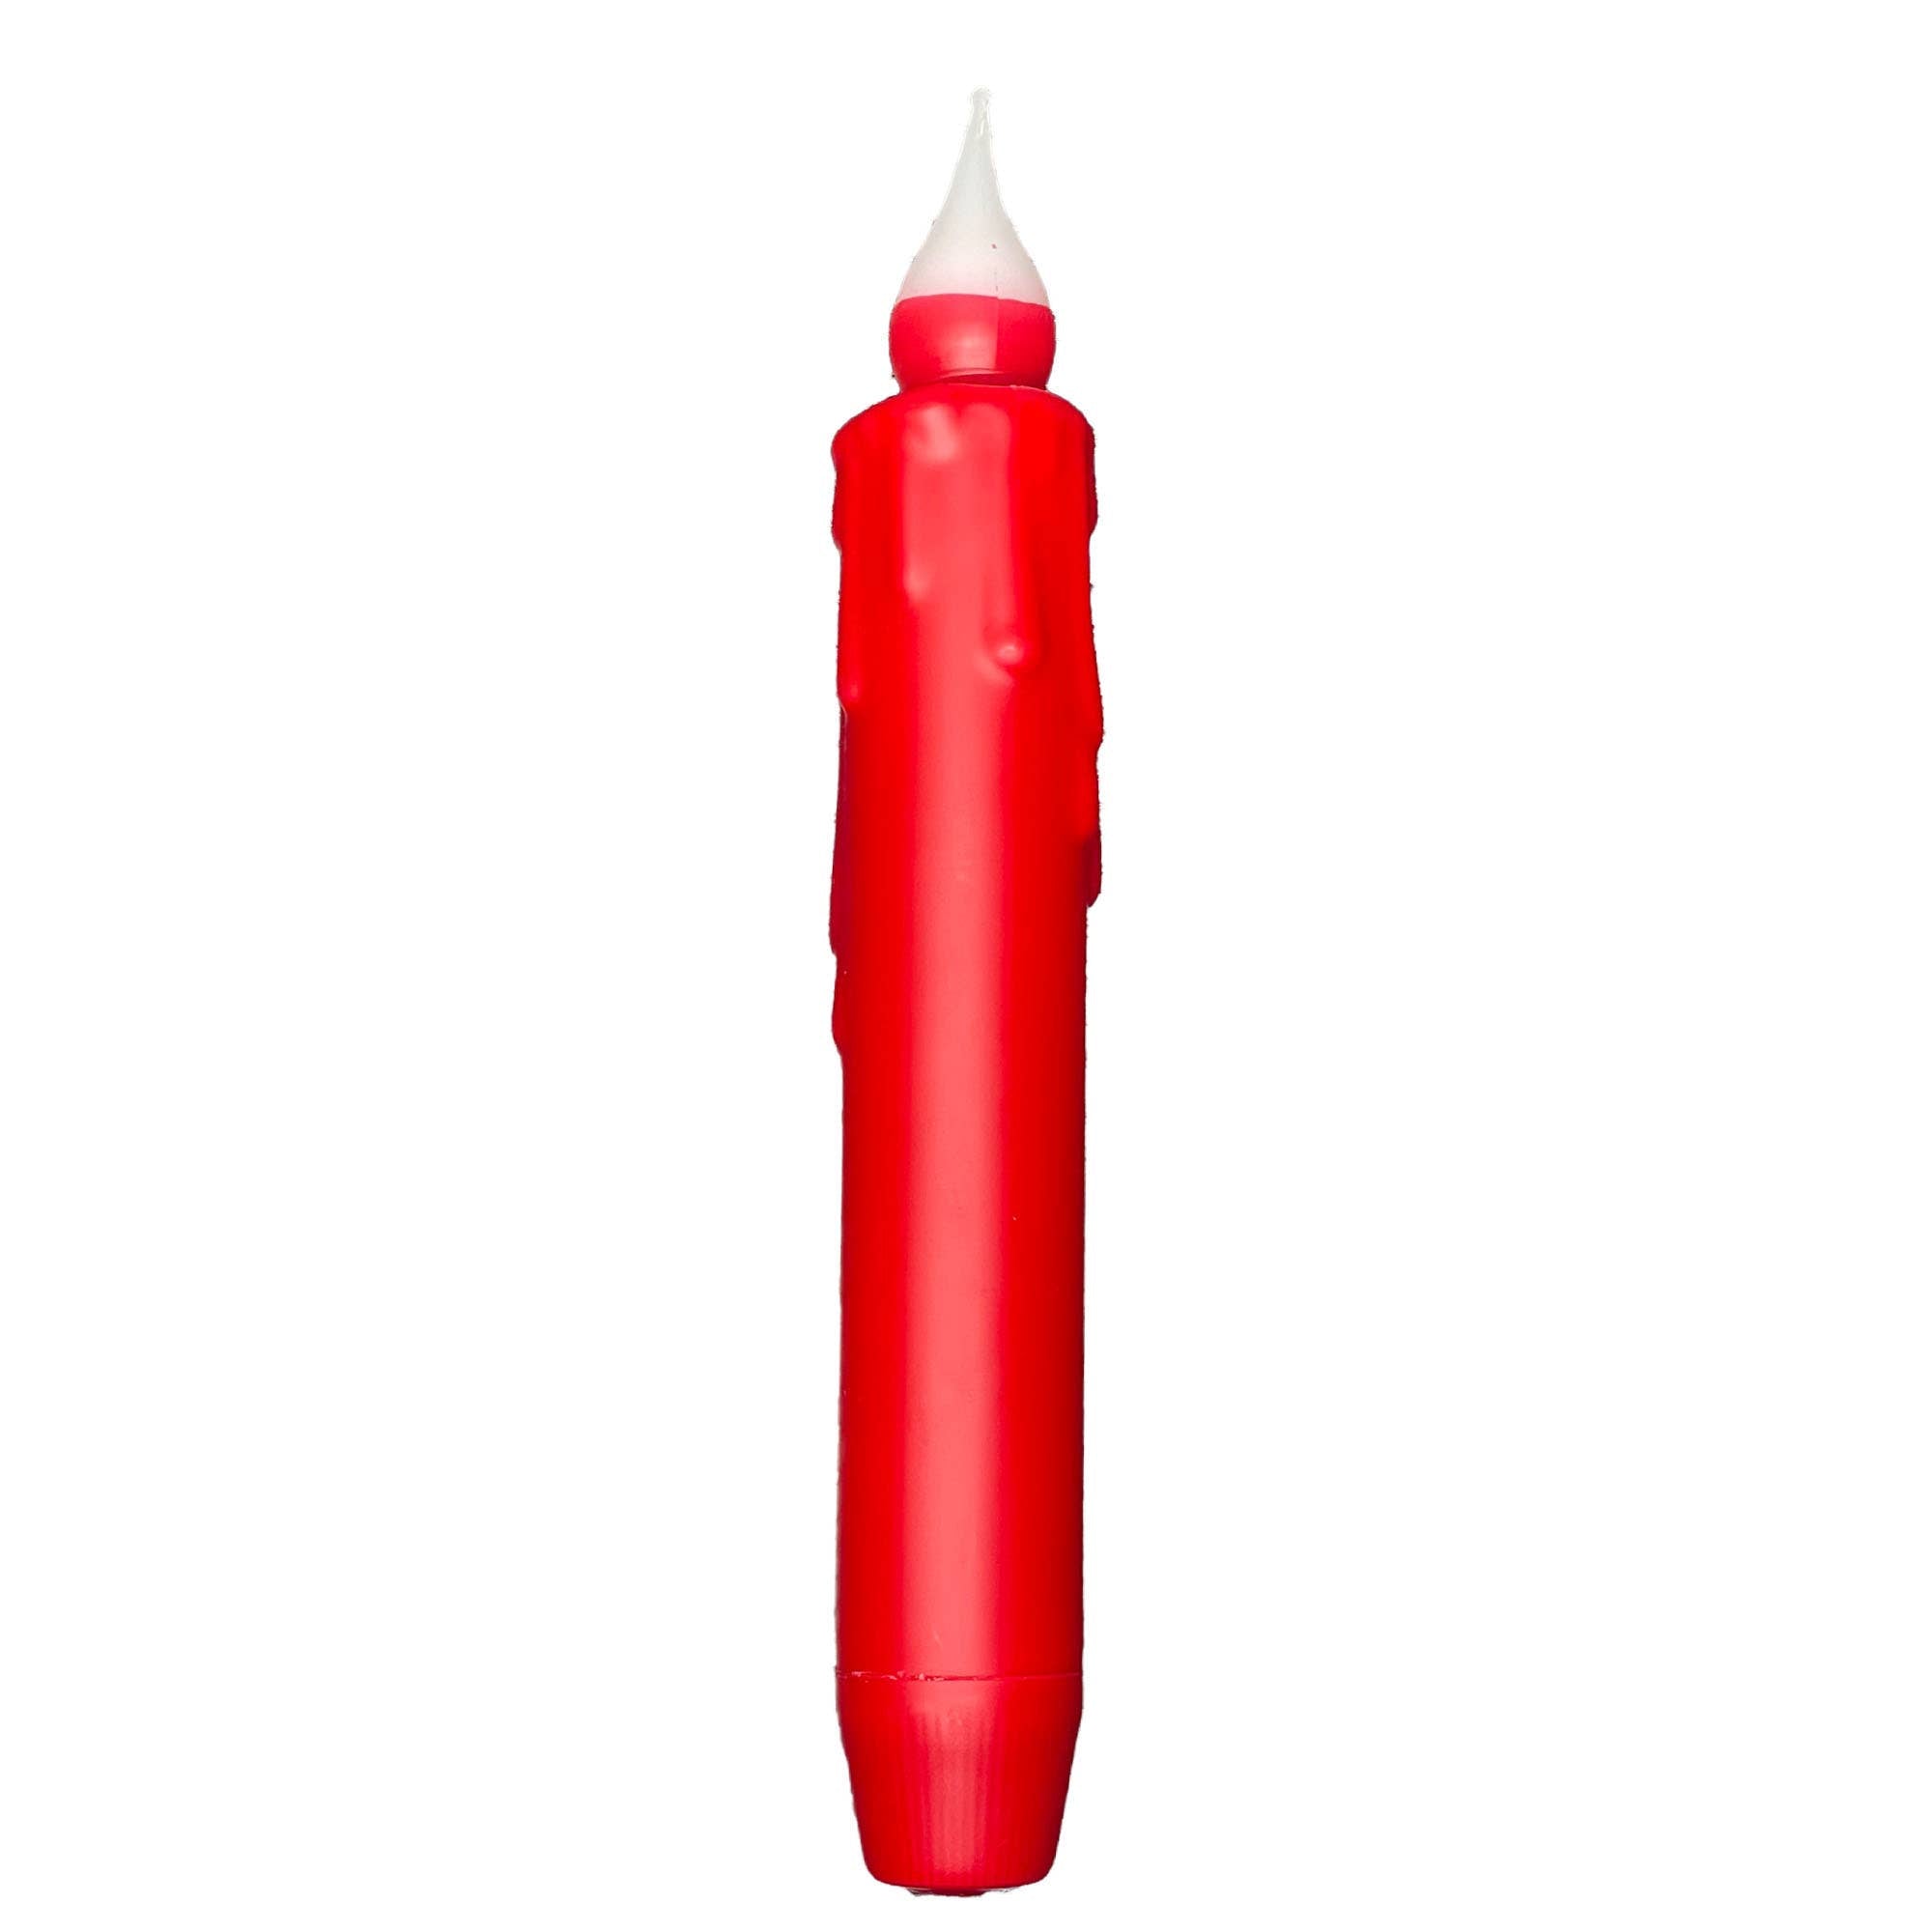 Candle: 7" Tapered LED Light, Battery Operated Timer Candle, Red